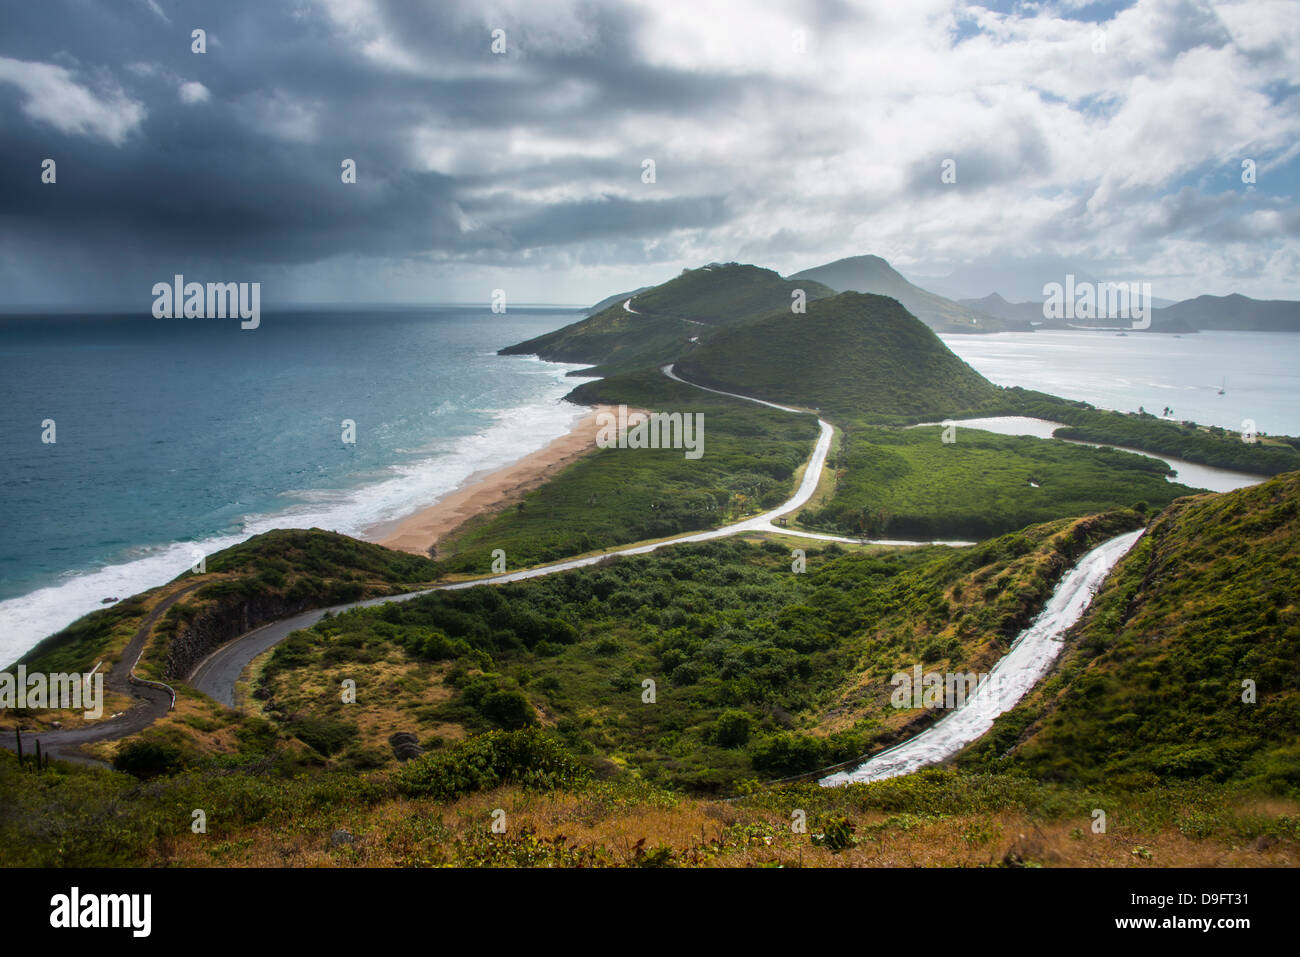 View over Turtle Bay on St. Kitts, St. Kitts and Nevis, Leeward Islands, West Indies, Caribbean Stock Photo